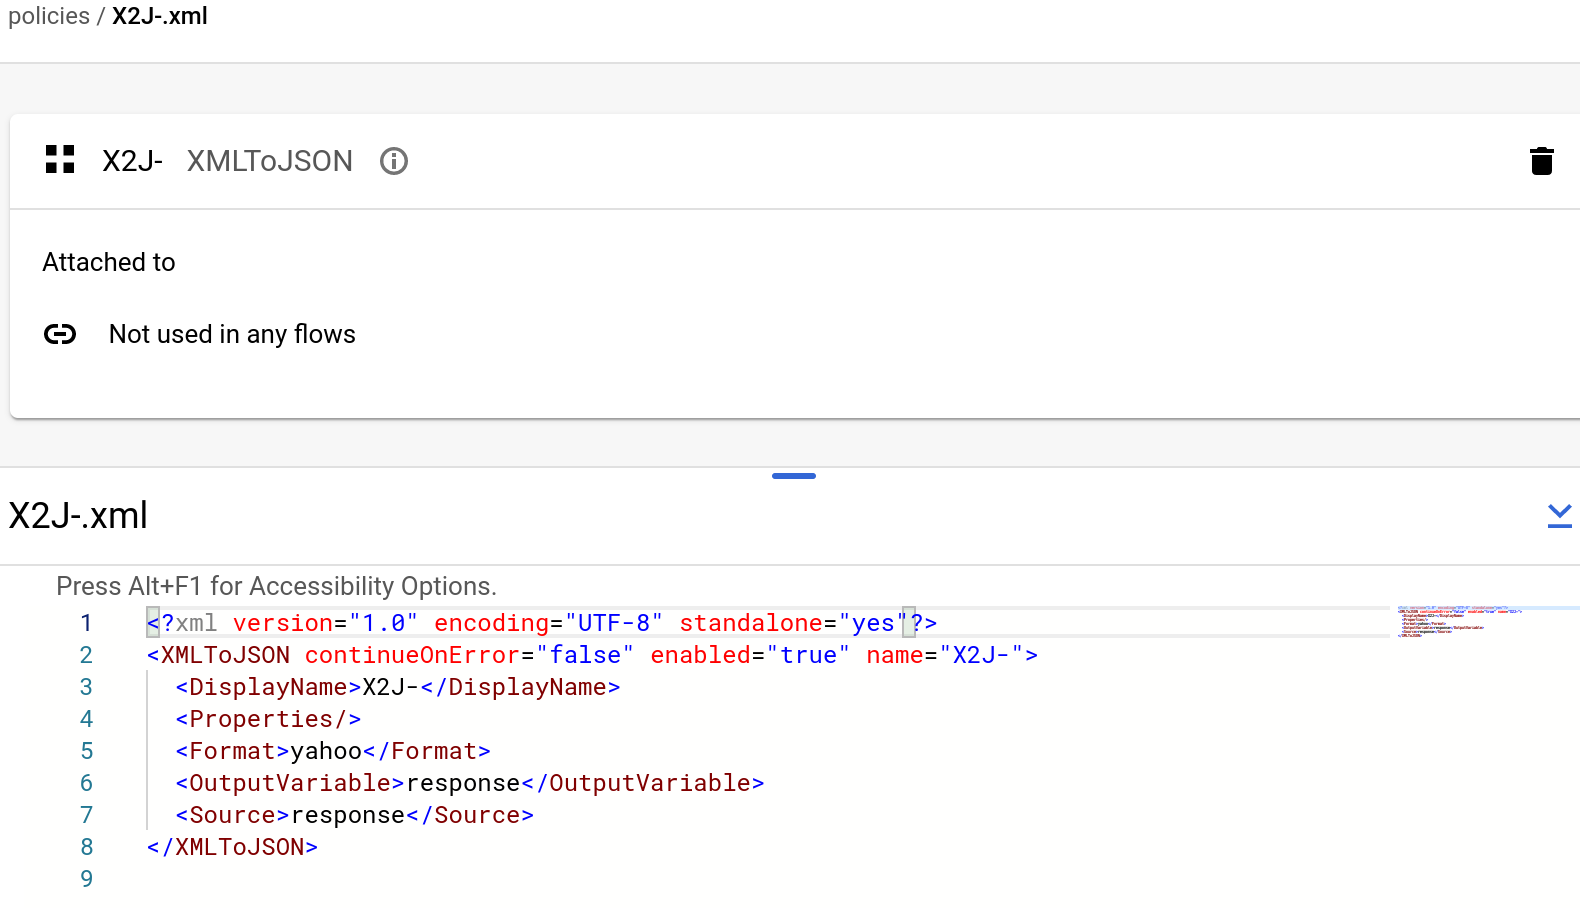 XML To JSON policy displayed in Develop view.